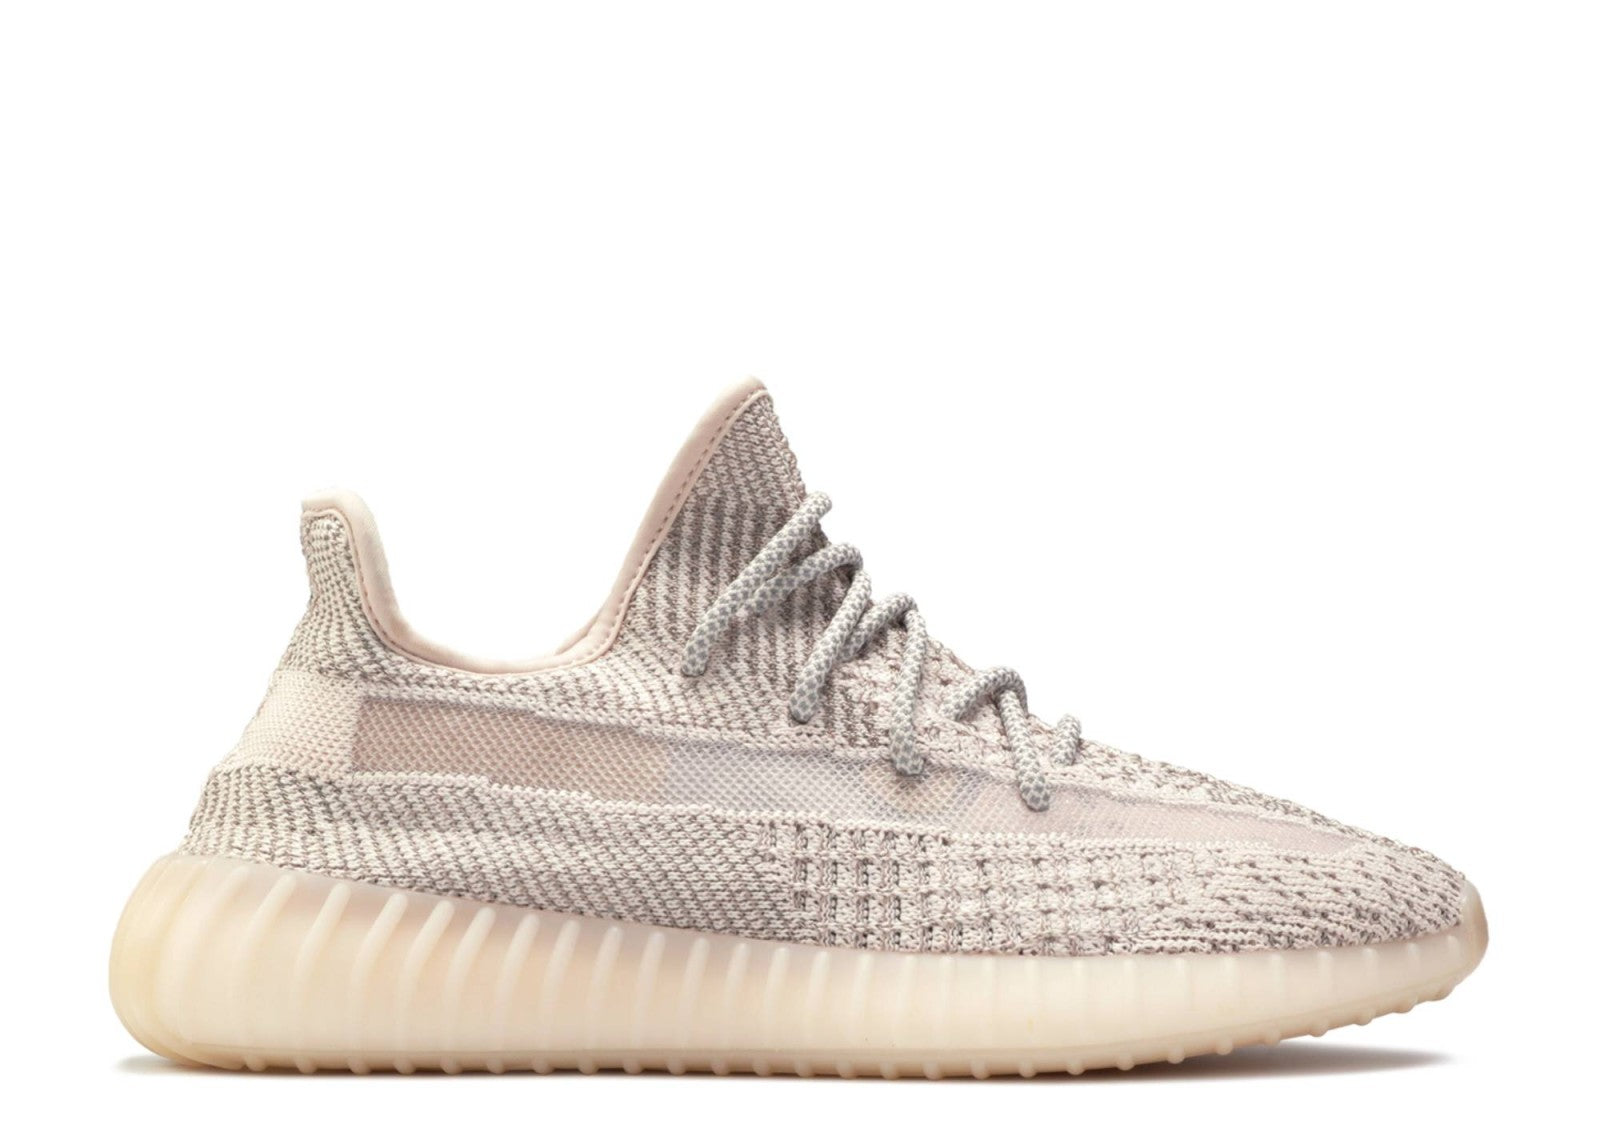 Adidas Yeezy Boost 350 V2 'Synth Reflective'